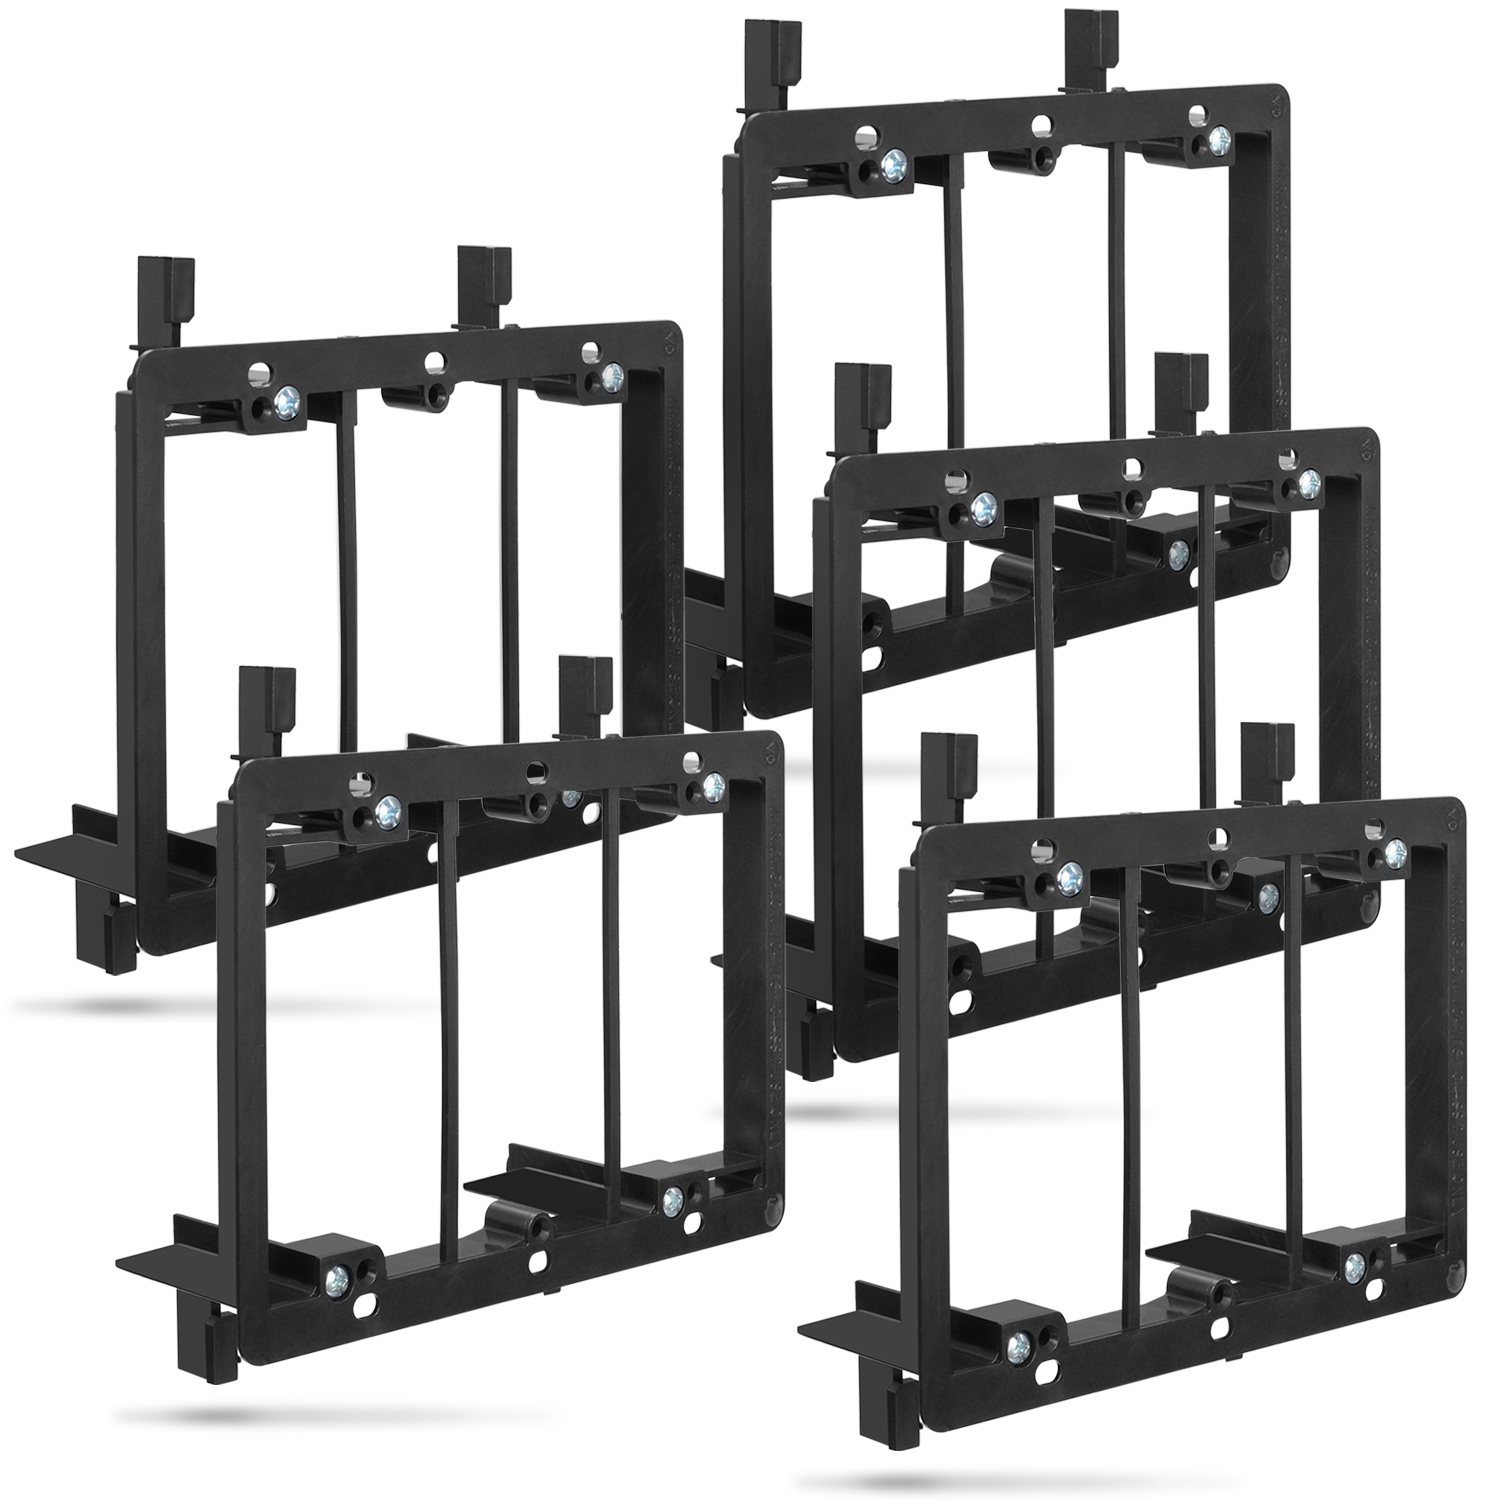 Low Voltage Mounting Bracket (3 Gang - 5 Packs), Fosmon Low Voltage Mounting Bracket (Mounting Screws Included) for Telephone Wires, Network Cables, HDMI, Coaxial, and Speaker Cables - image 1 of 4